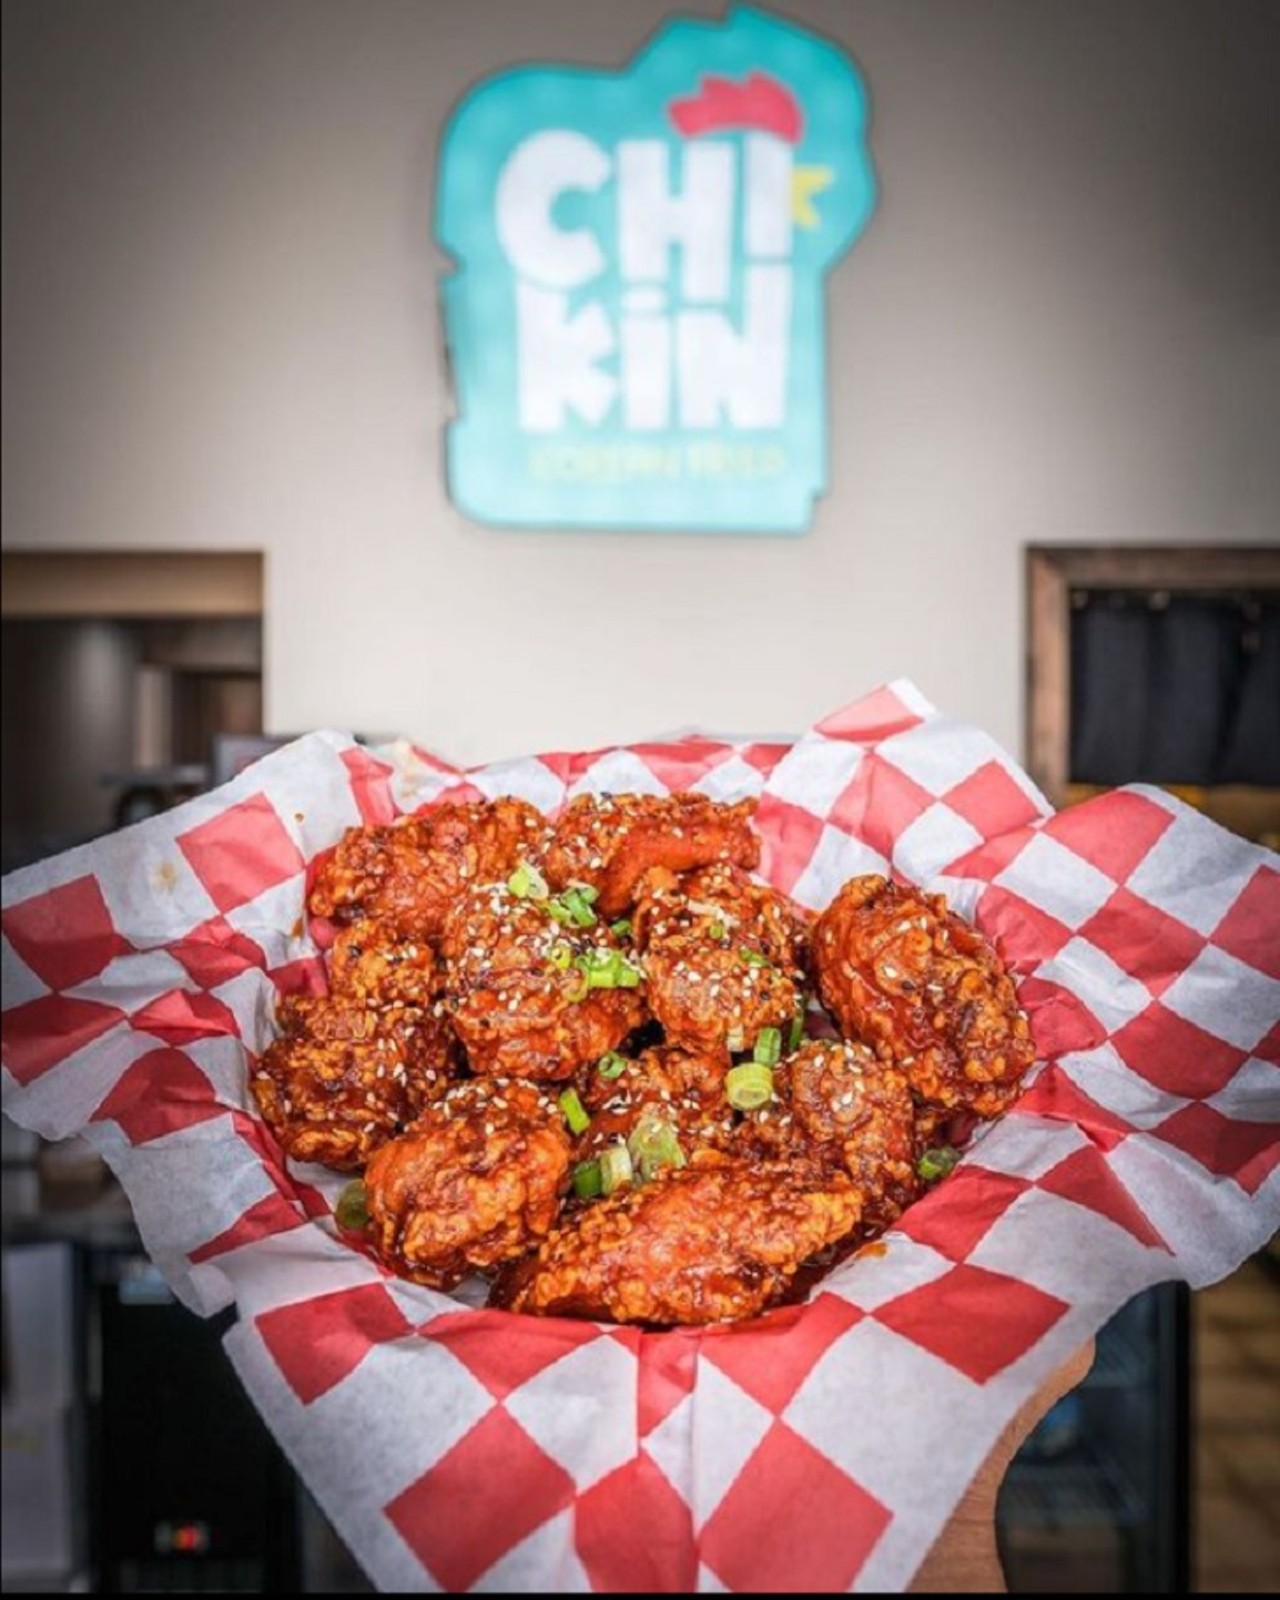 Chi-Kin 
813 N. Mills Ave., 407-730-8658
Customers drive over an hour to get their hands on these double-fried crispy Korean wings. Rest assured, if you&#146;re dragging any vegan friends along, they have plenty of vegan chi-kin options. 
Photo via Chi-Kin on Instagram